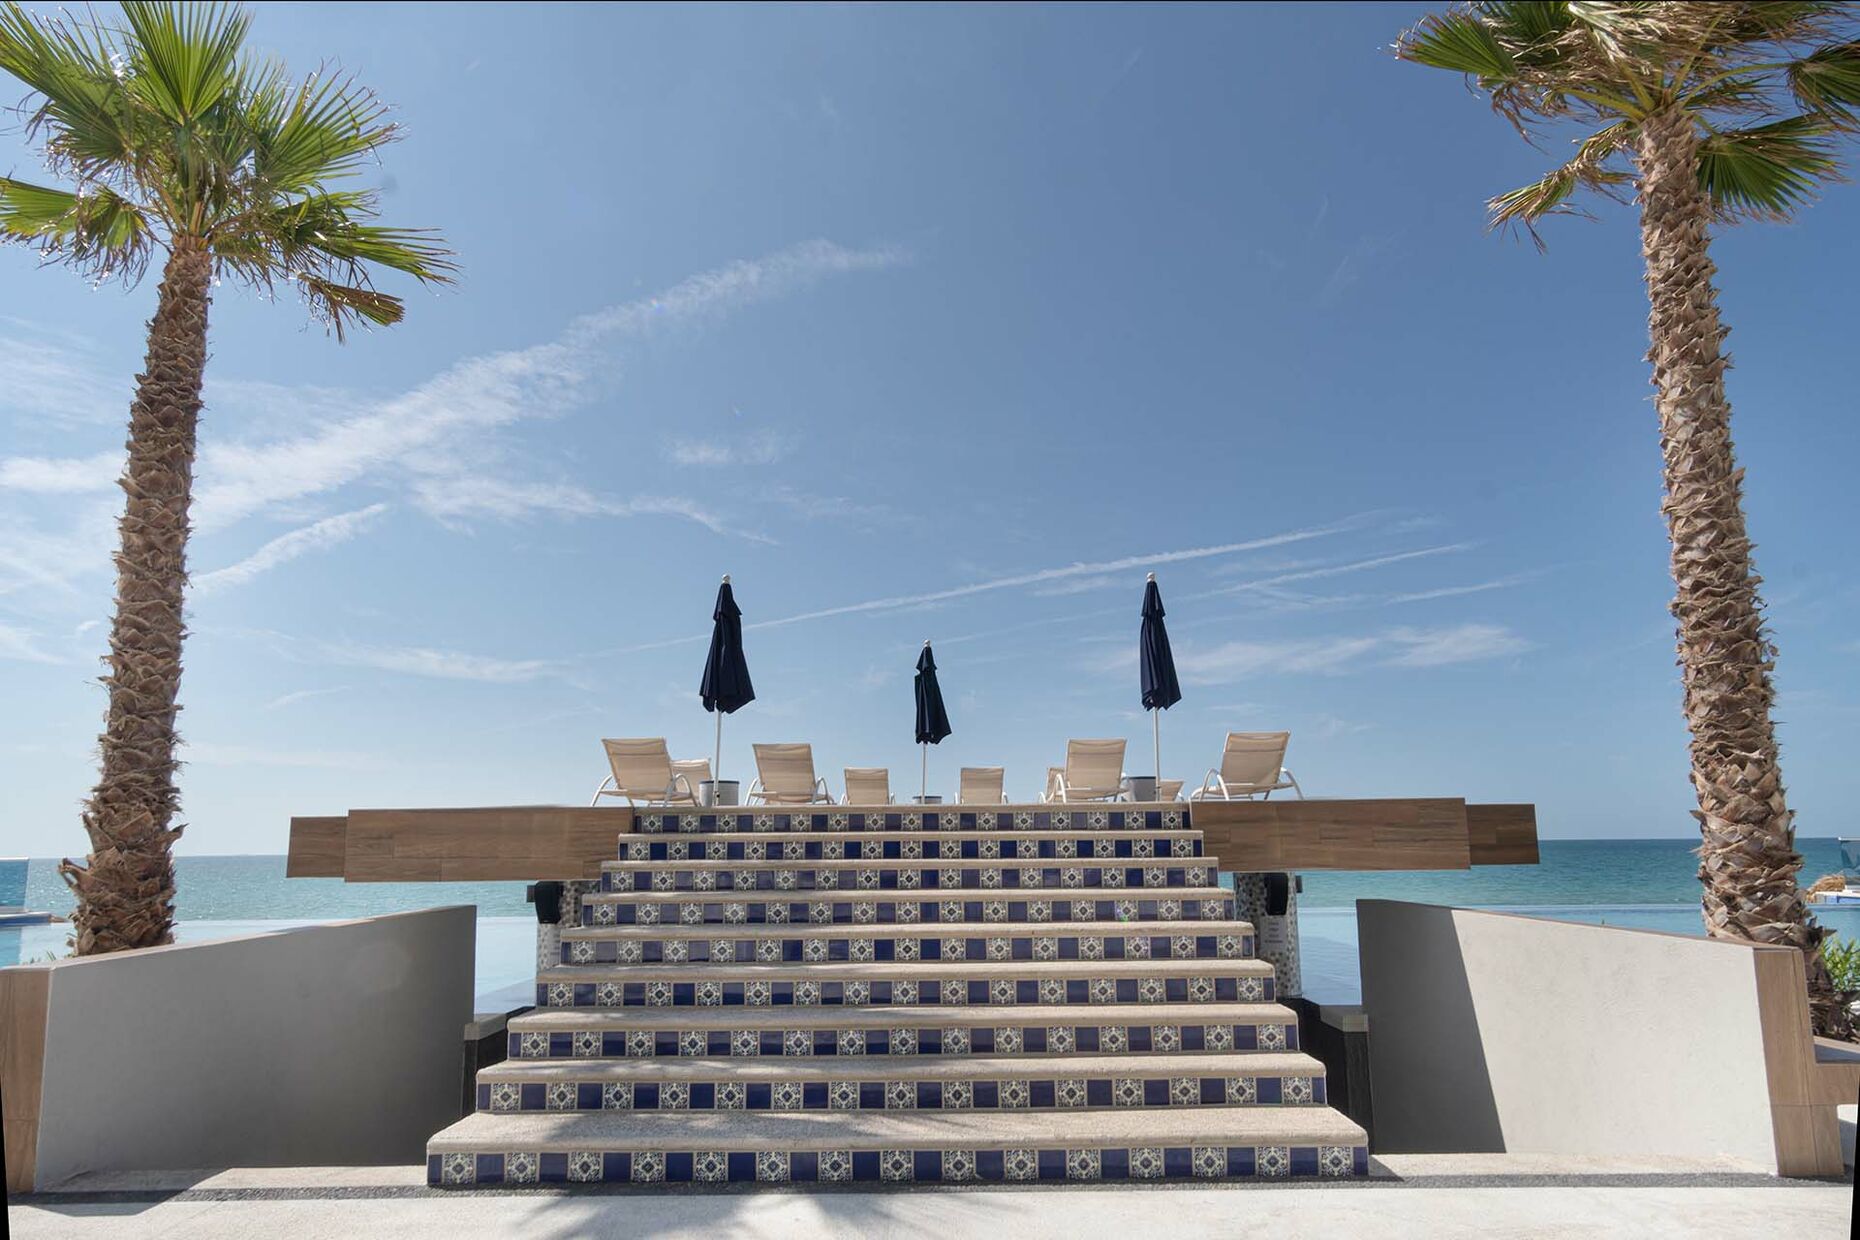 Stairs by pool area